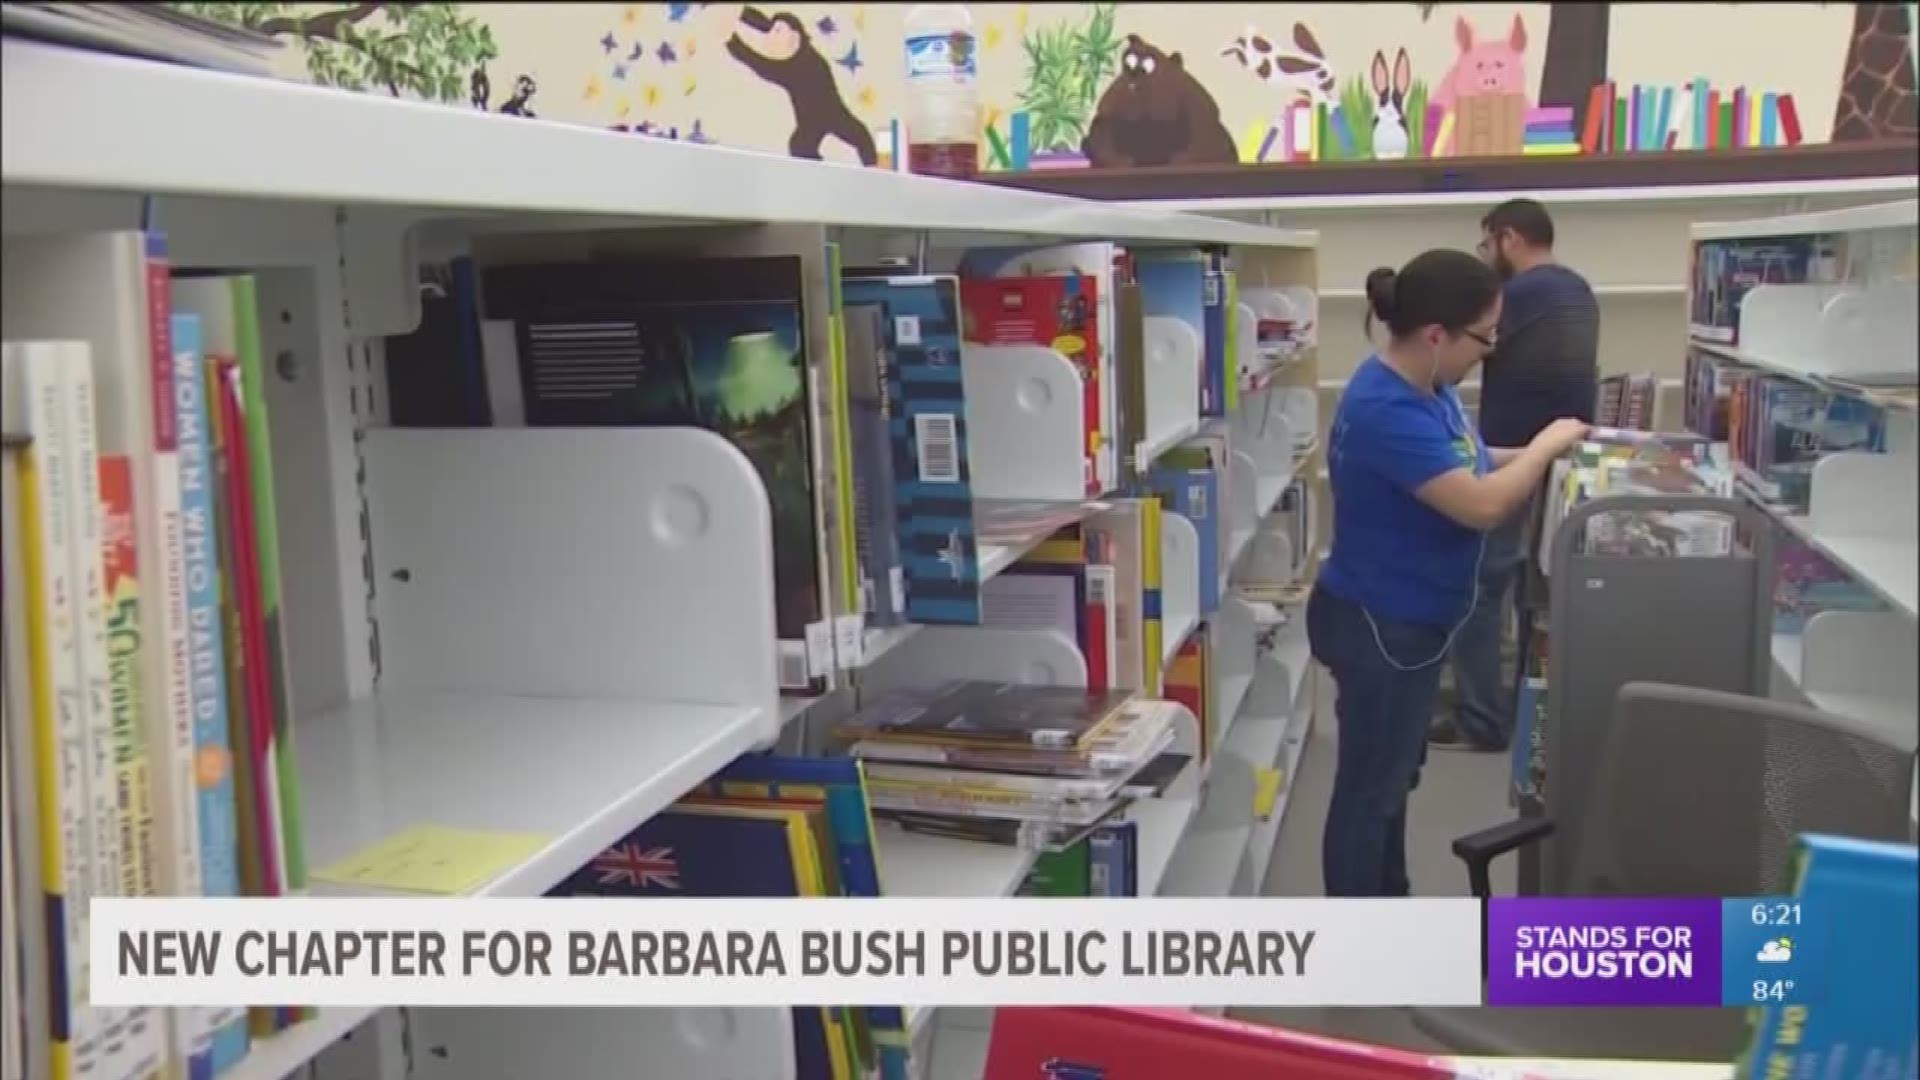 The Barbara Bush Public Library in the Cypress Creek area is beginning a new chapter after it was damaged by Hurricane Harvey. 